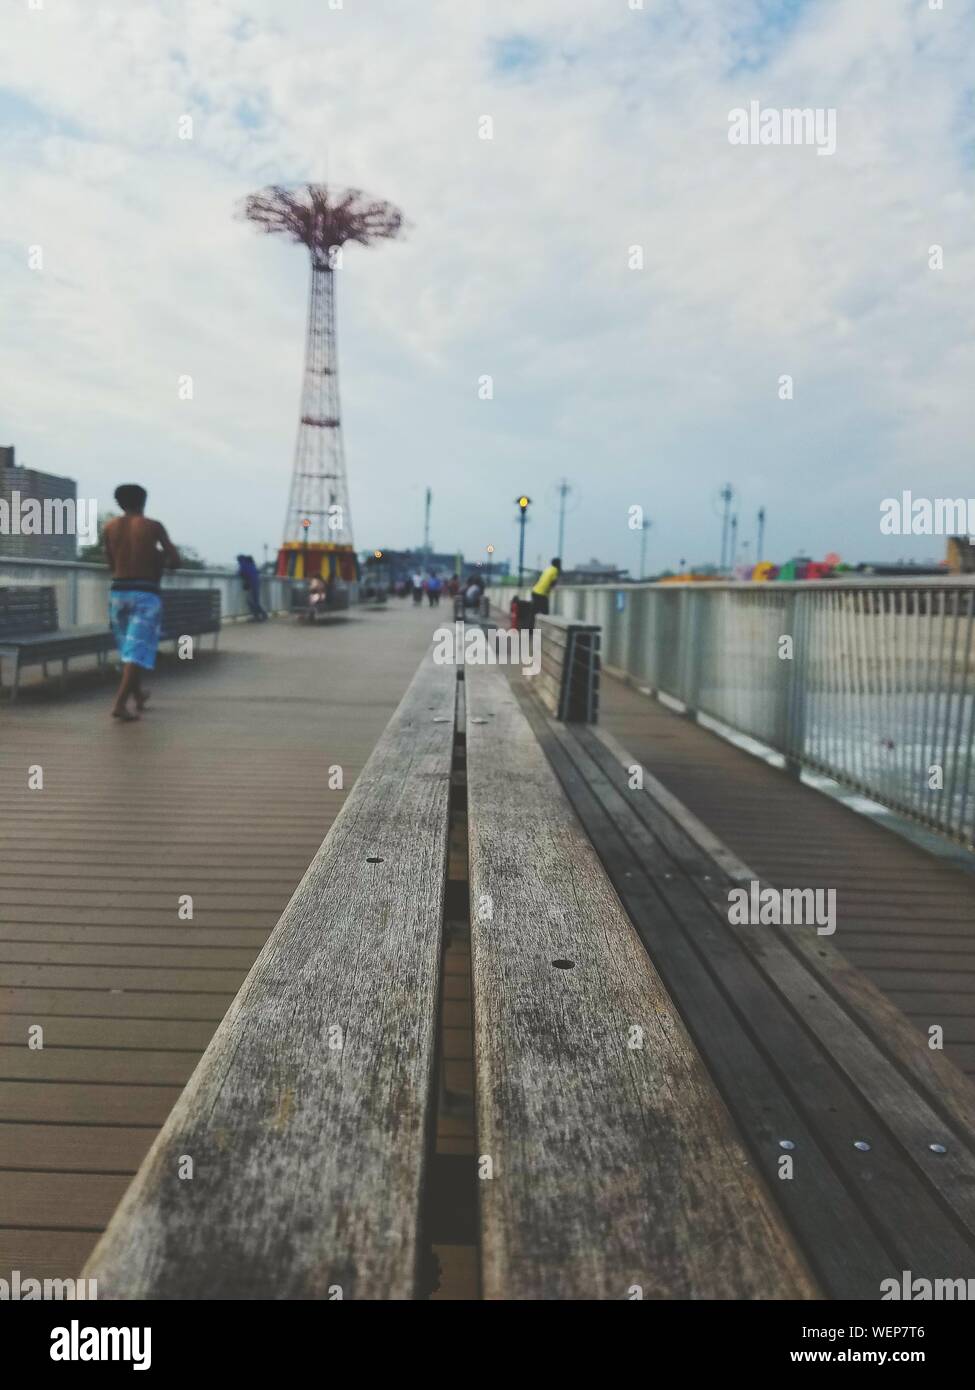 Wooden Bench Against Parachute Jump At Coney Island Stock Photo